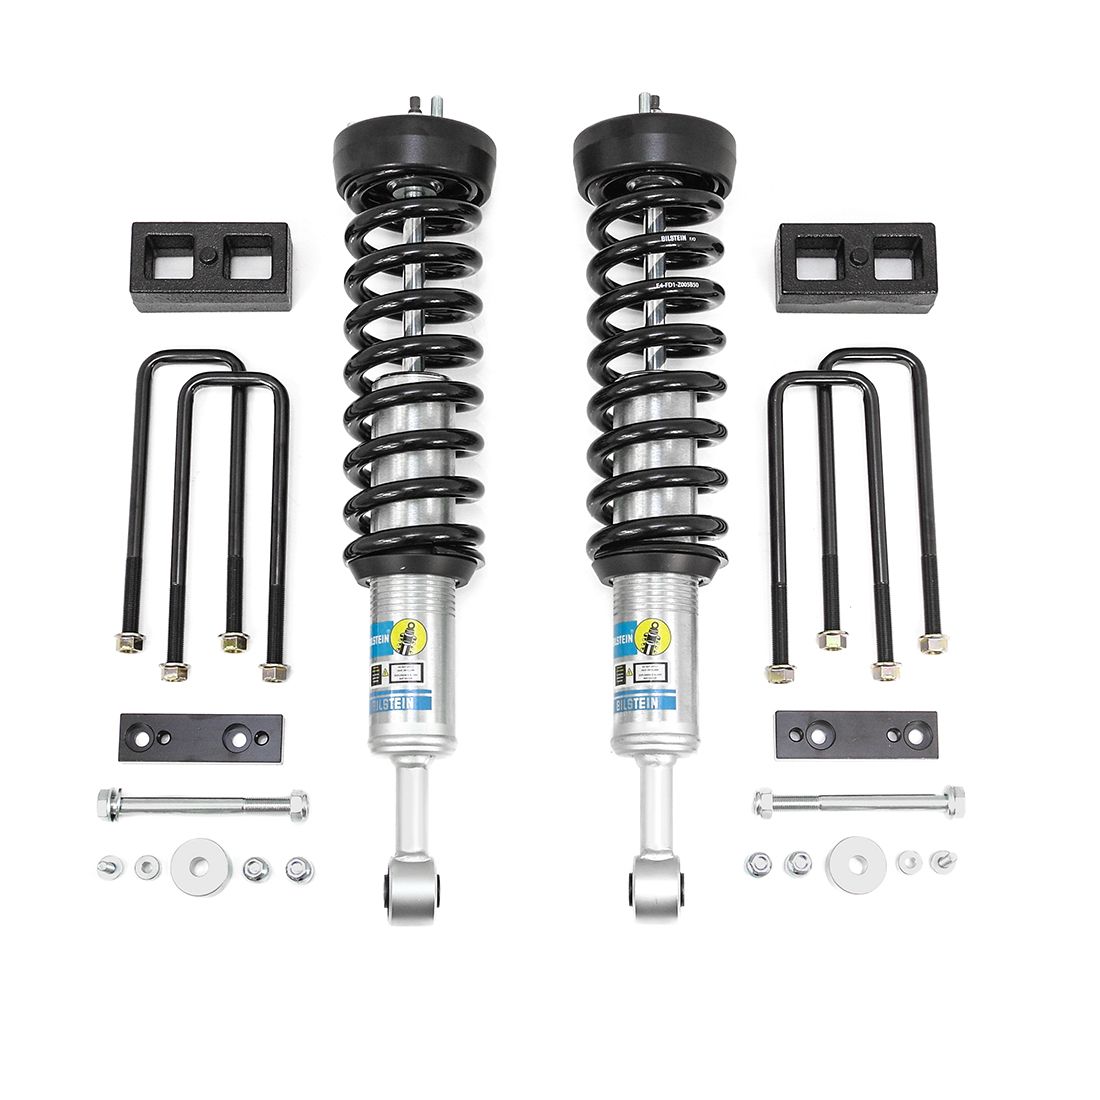 3in Shock Spacer Kit for use with Bilstein Shocks